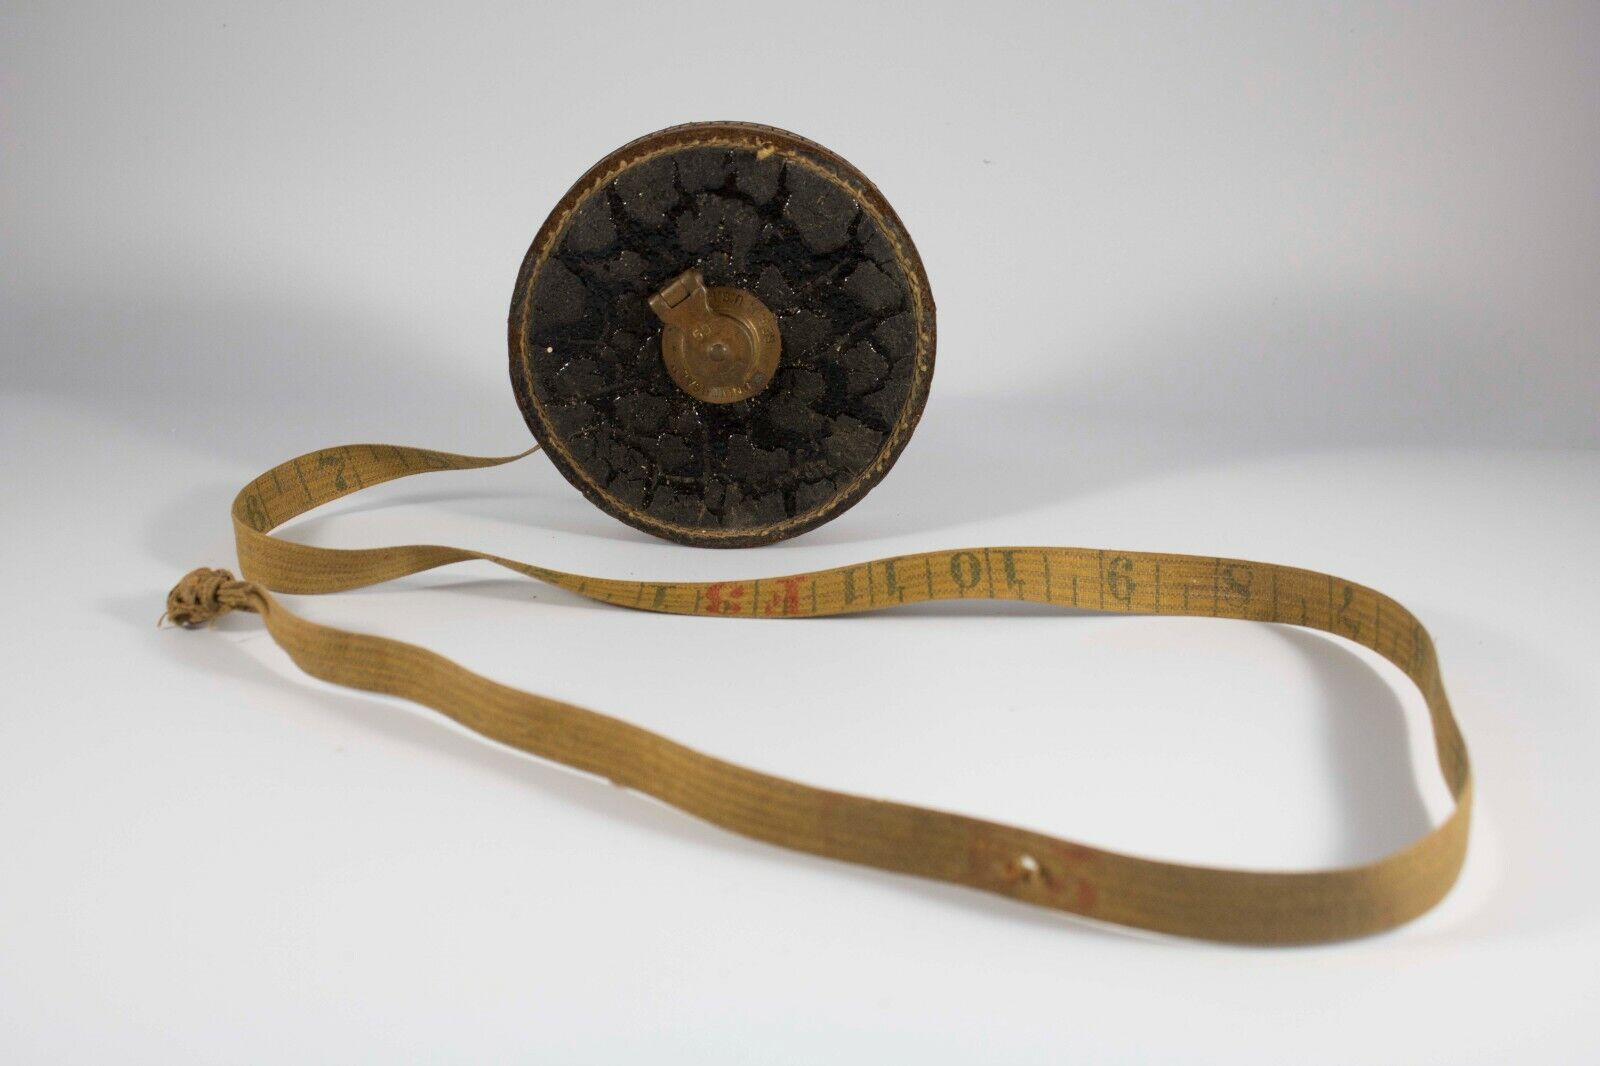 ANTIQUE MEASURING TAPE 50ft, BLACK, RARE, LEATHER AND CLOTH, EARLY 1900s